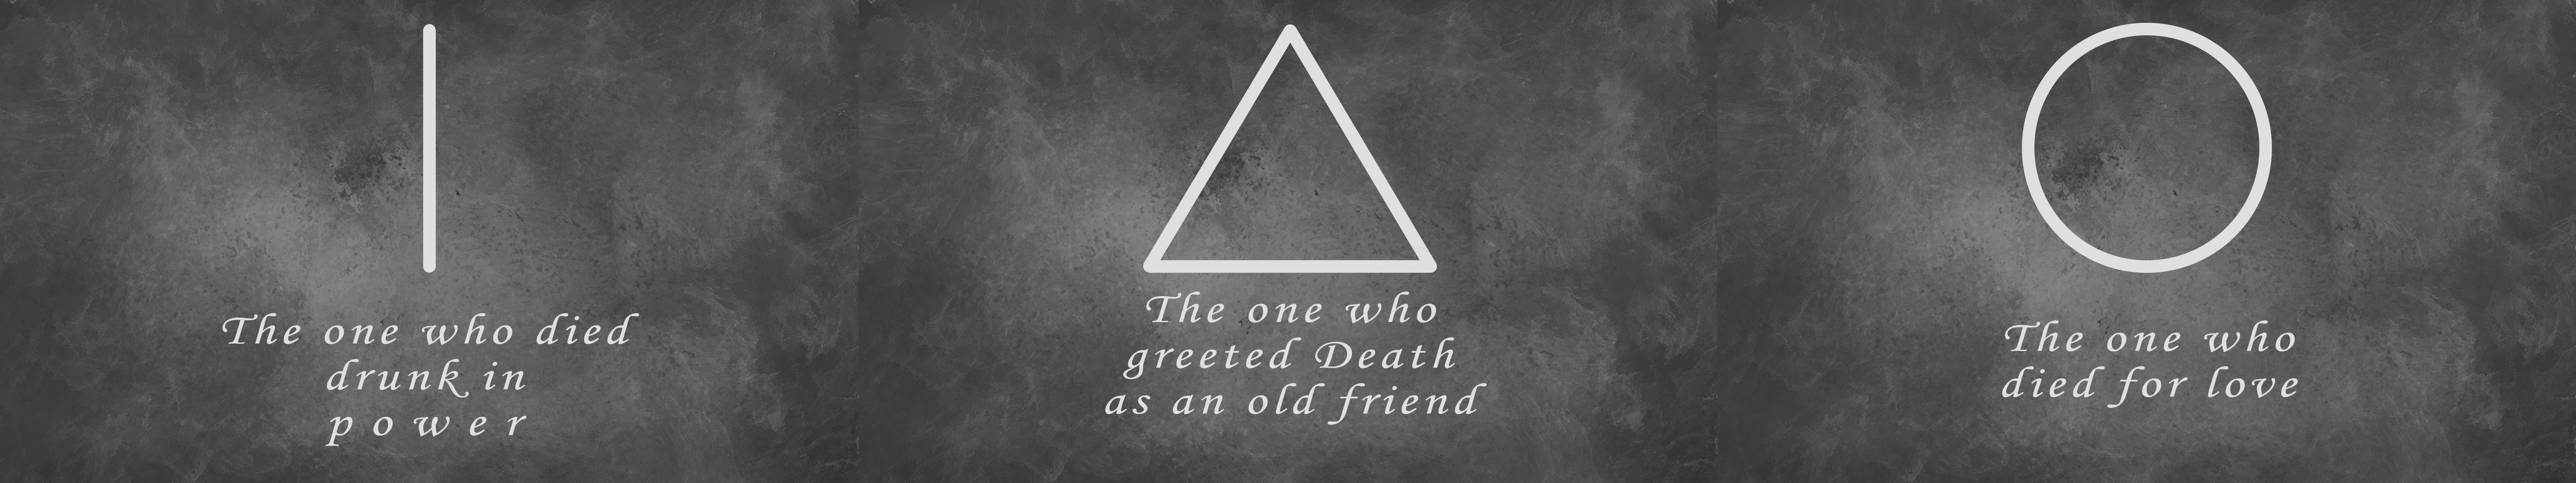 General 5760x1080 Harry Potter triple screen minimalism Harry Potter and the Deathly Hallows